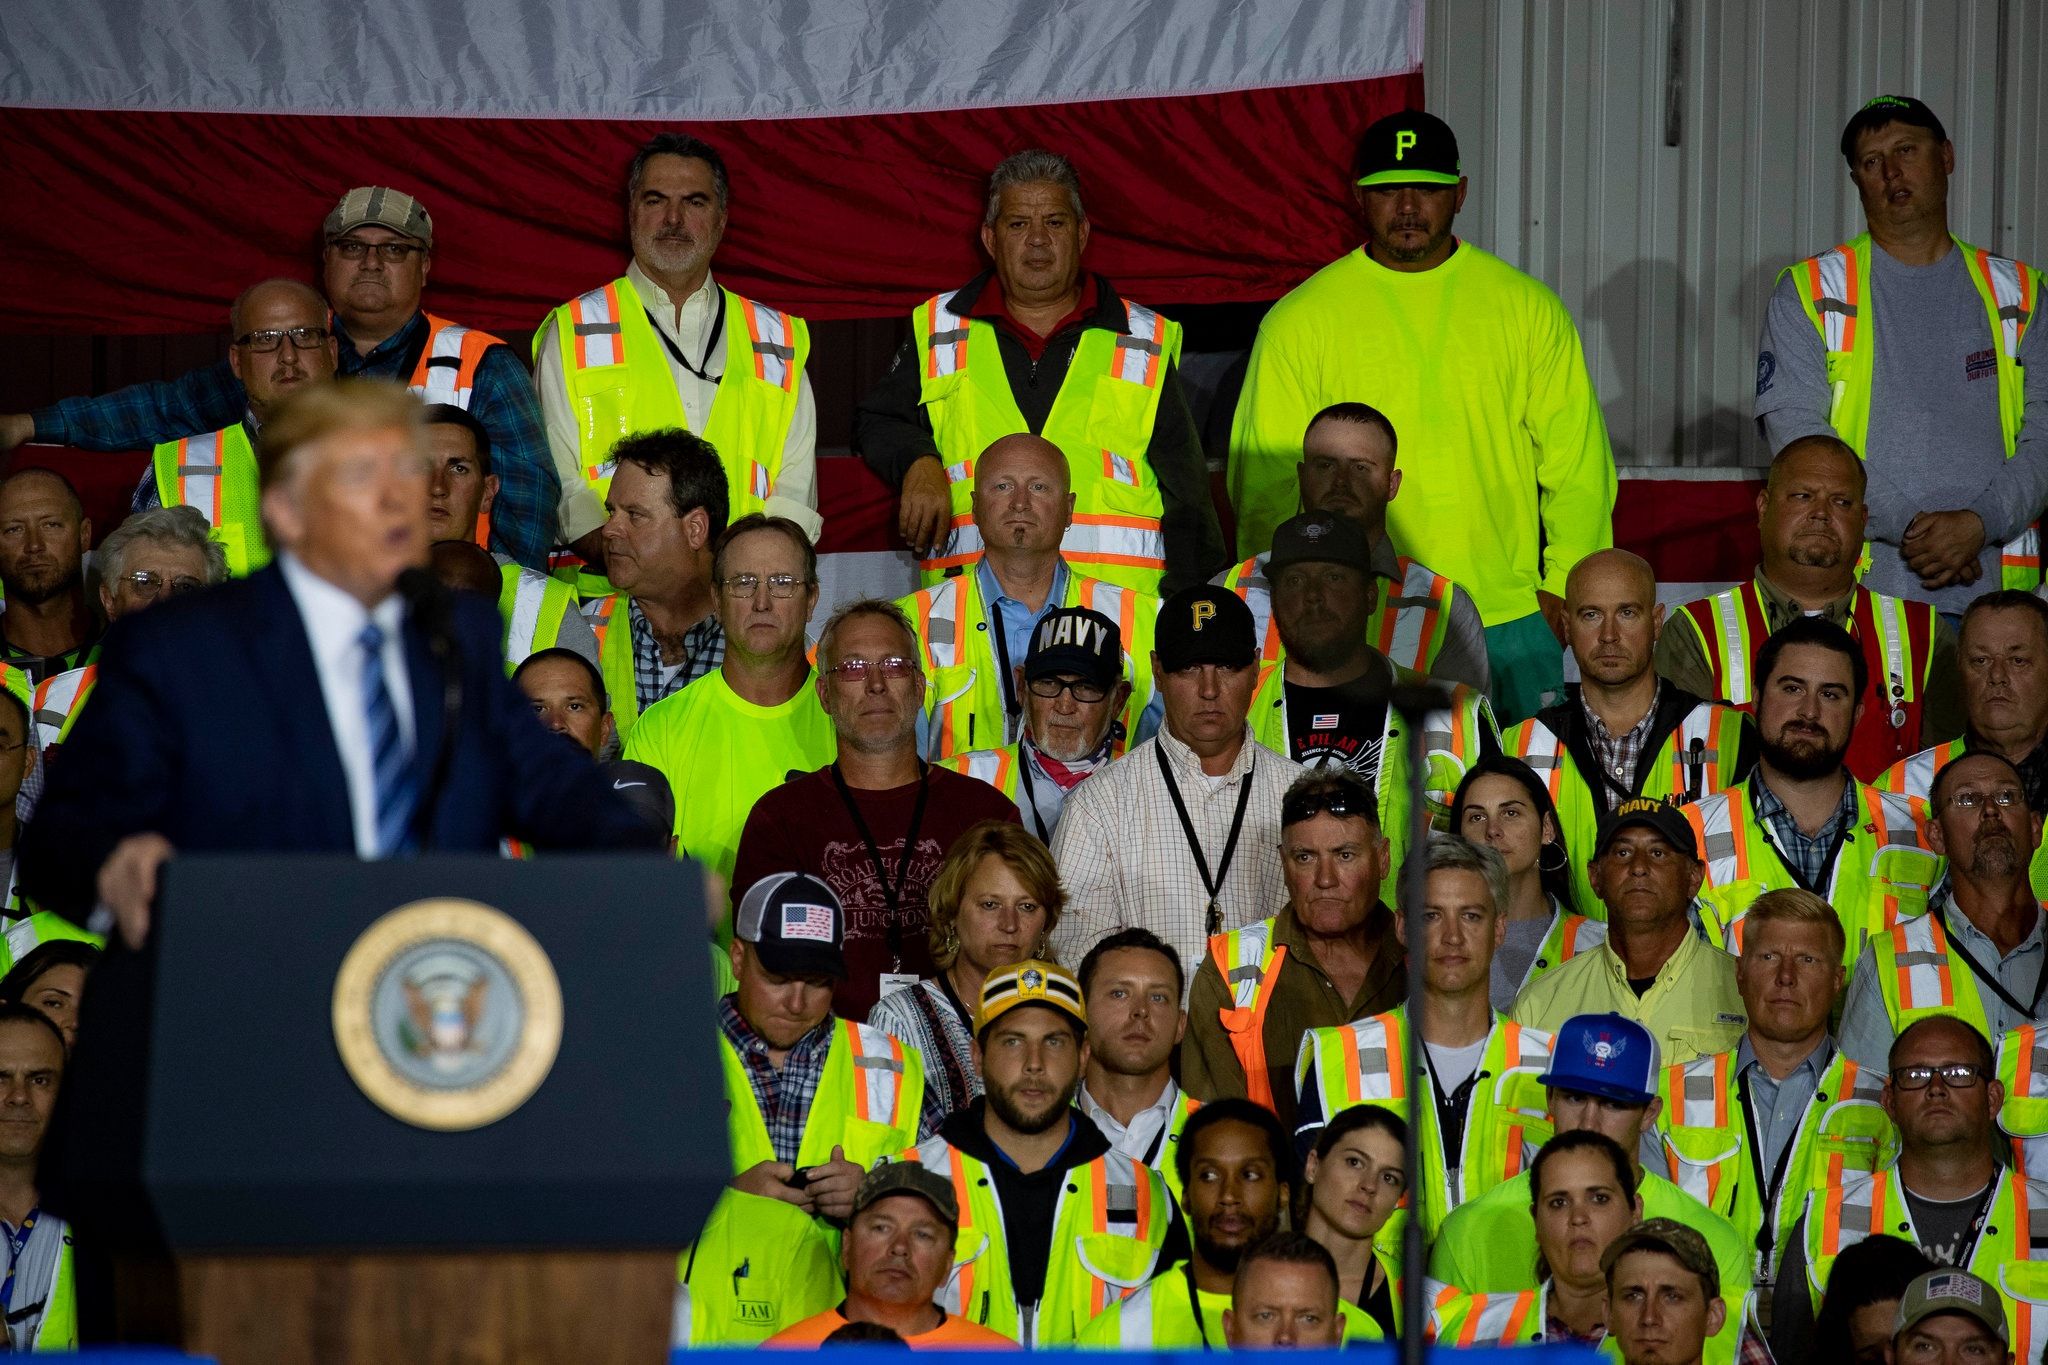 Thousands of RD Shell petro union workers were forced to attend Drumpf's speech. They were told "Your attendance is not mandatory," but the rules said that only those who arrived at 7 a.m., had their work IDs scanned and then stood waiting for Dotard for hours would get paid for the time. "NO SCAN, NO PAY!" Dicktators do what Dicktators do.